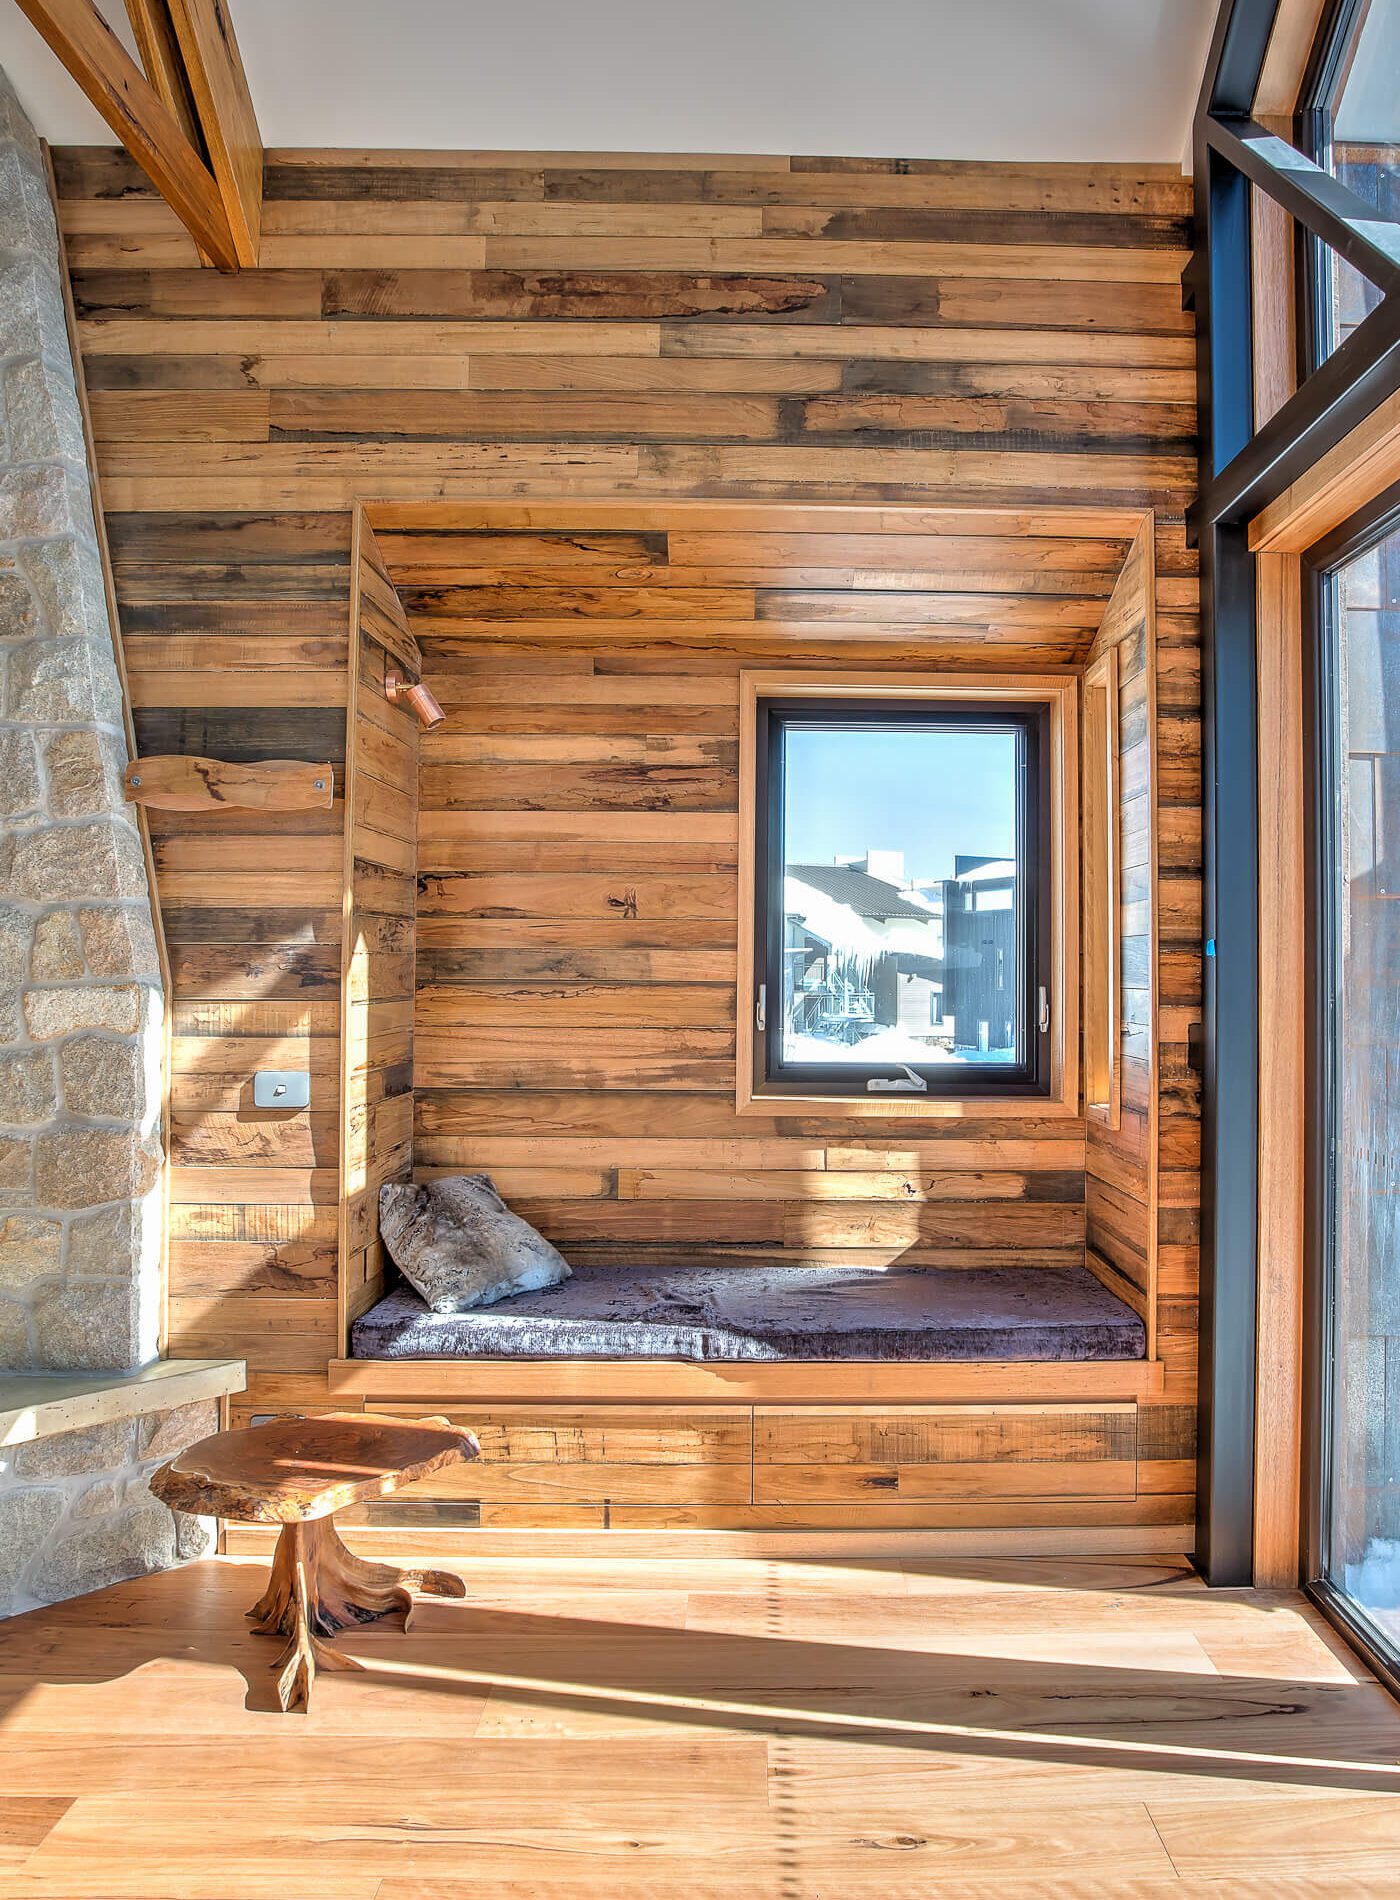 Day bed window seat in chalet living room